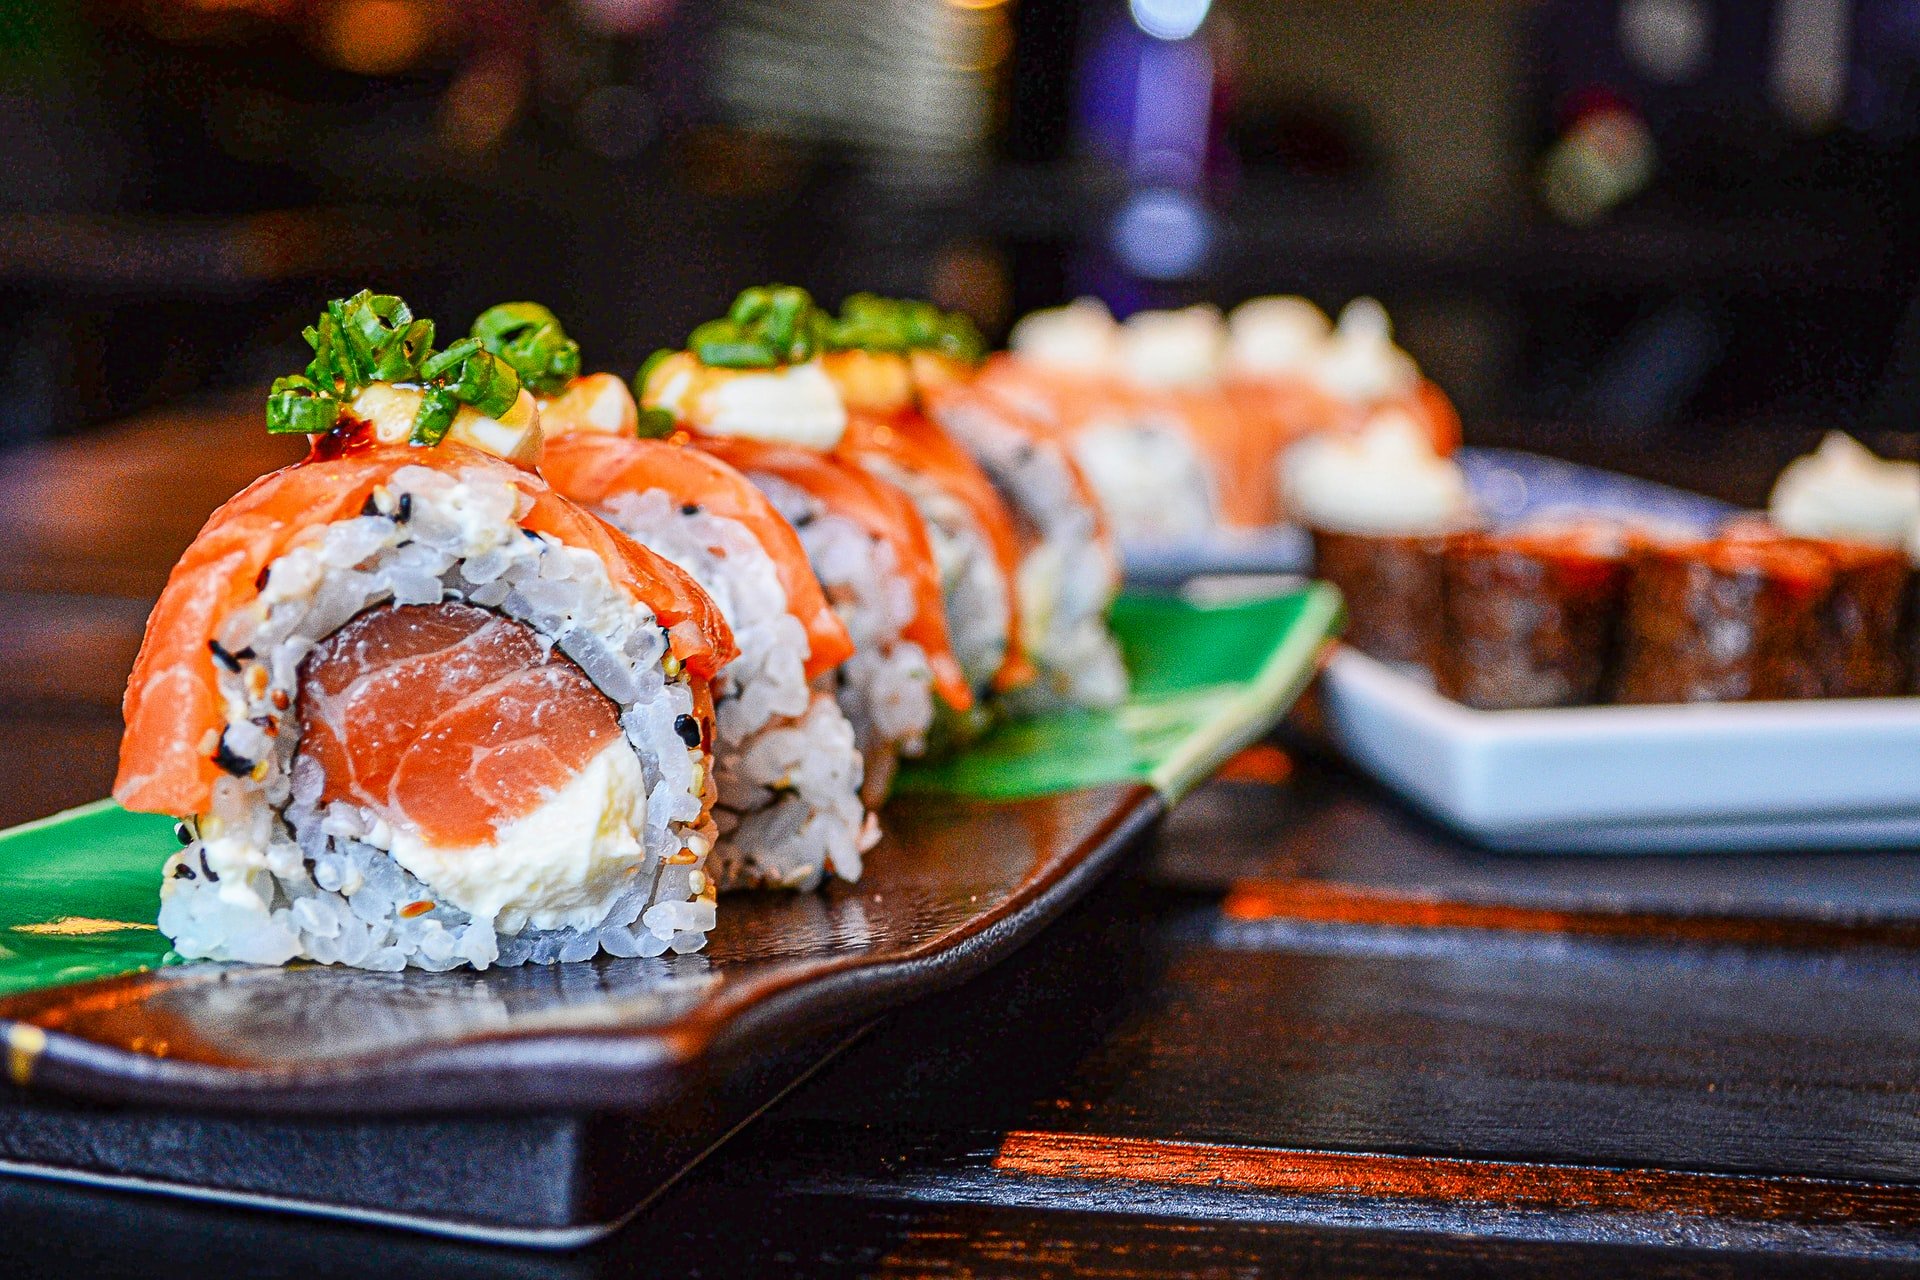 Why SushiSwap’s SUSHI Has Surged 100% Higher in a Week